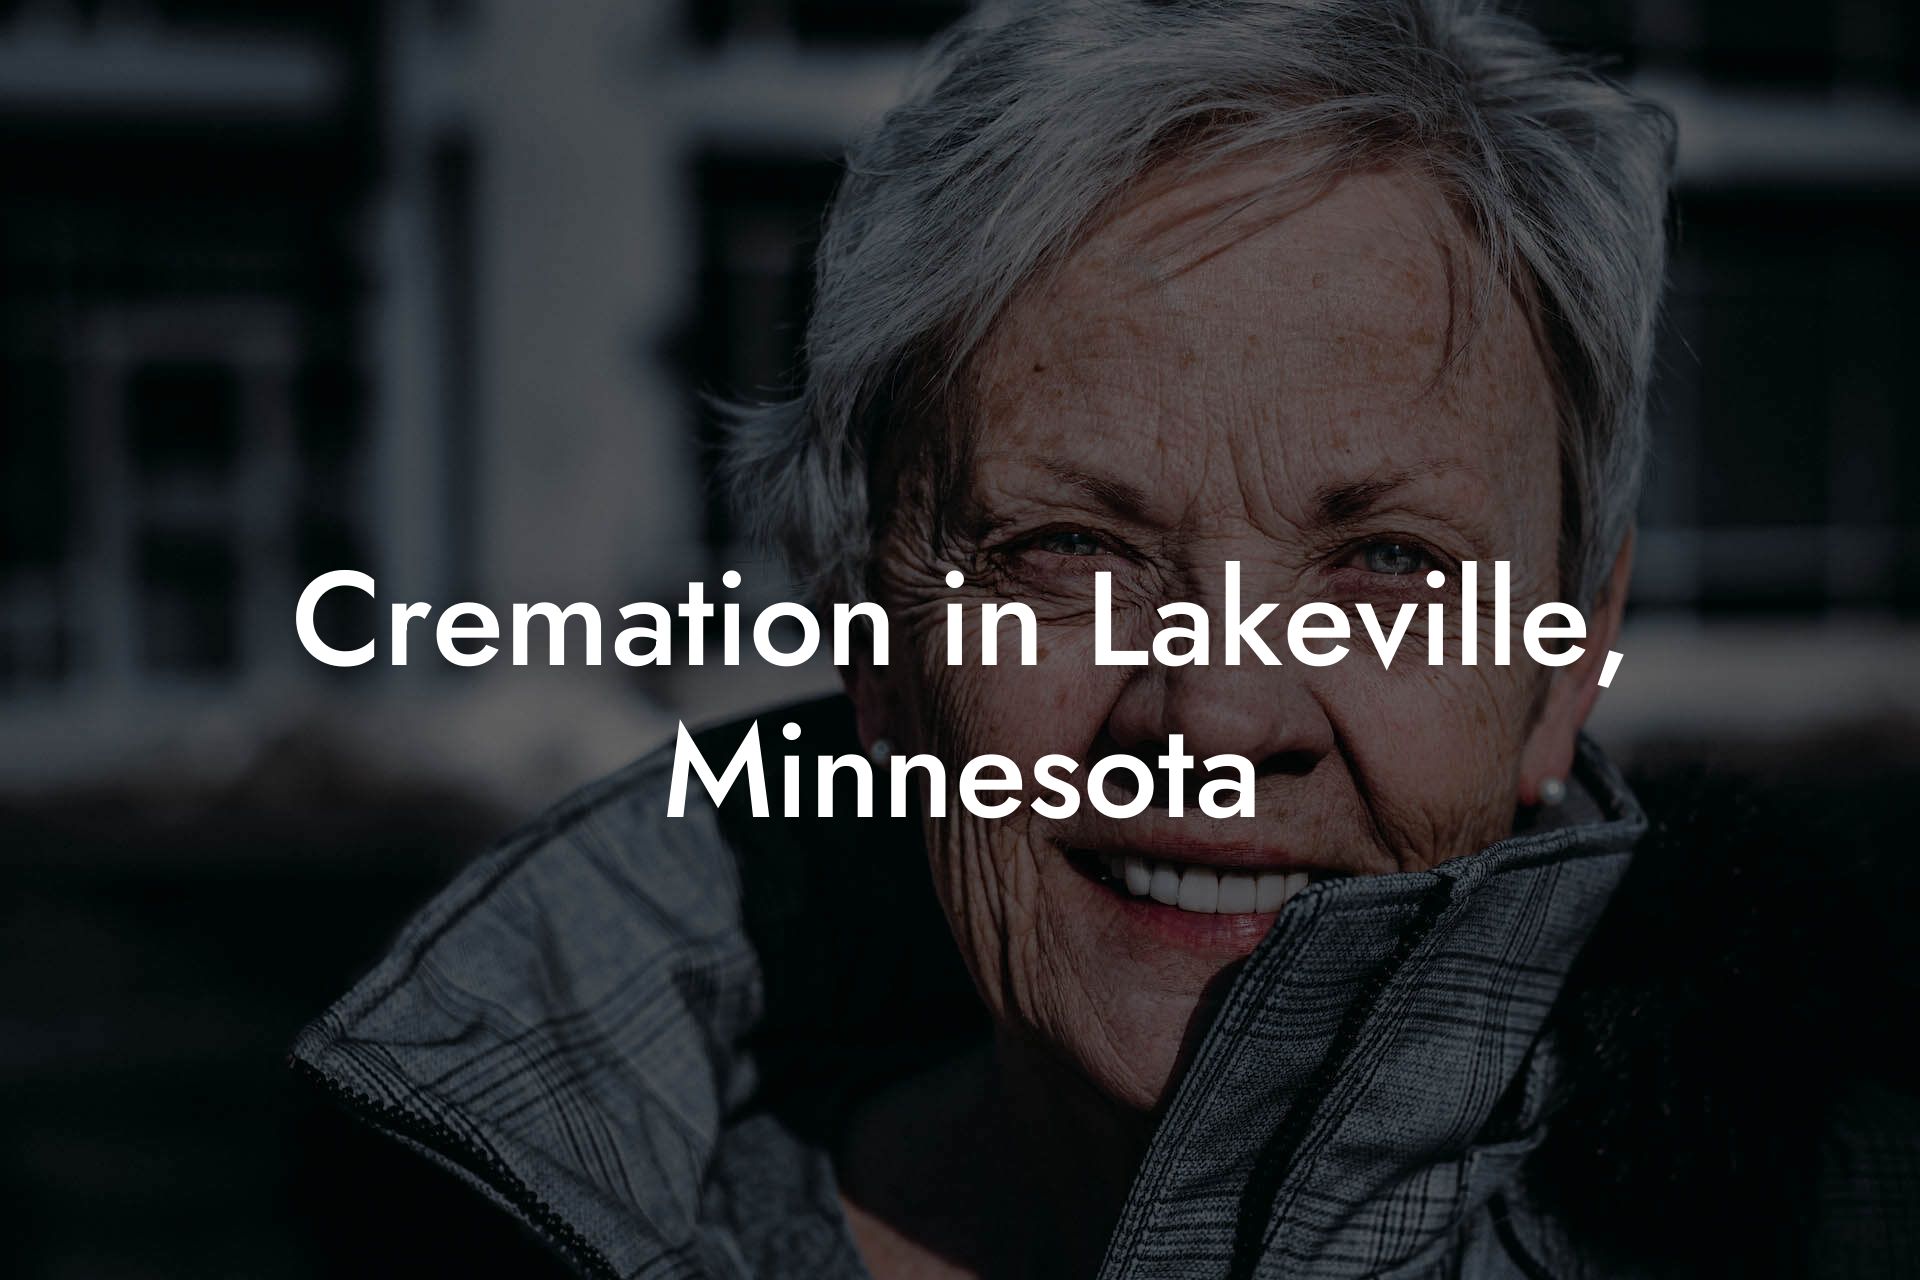 Cremation in Lakeville, Minnesota